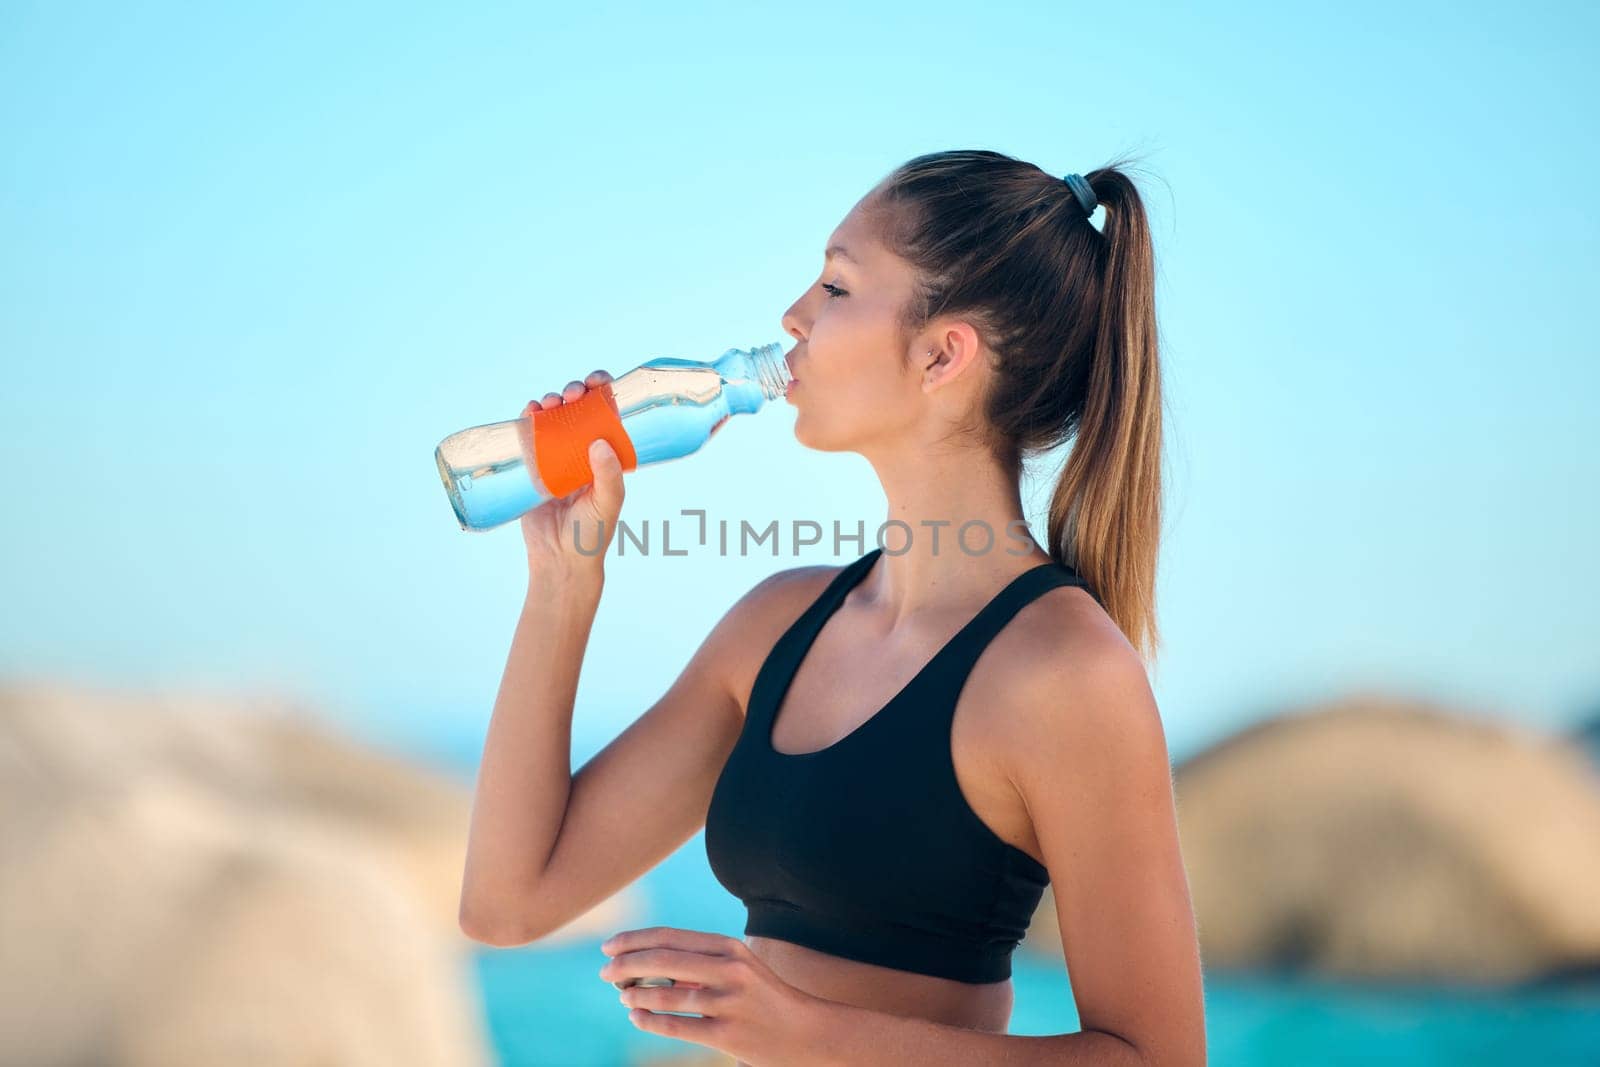 Beach, exercise and woman drinking water, health and training with stress relief, relax and break. Female person, girl and athlete outdoor, liquid and workout goal with hydration, fitness or wellness.